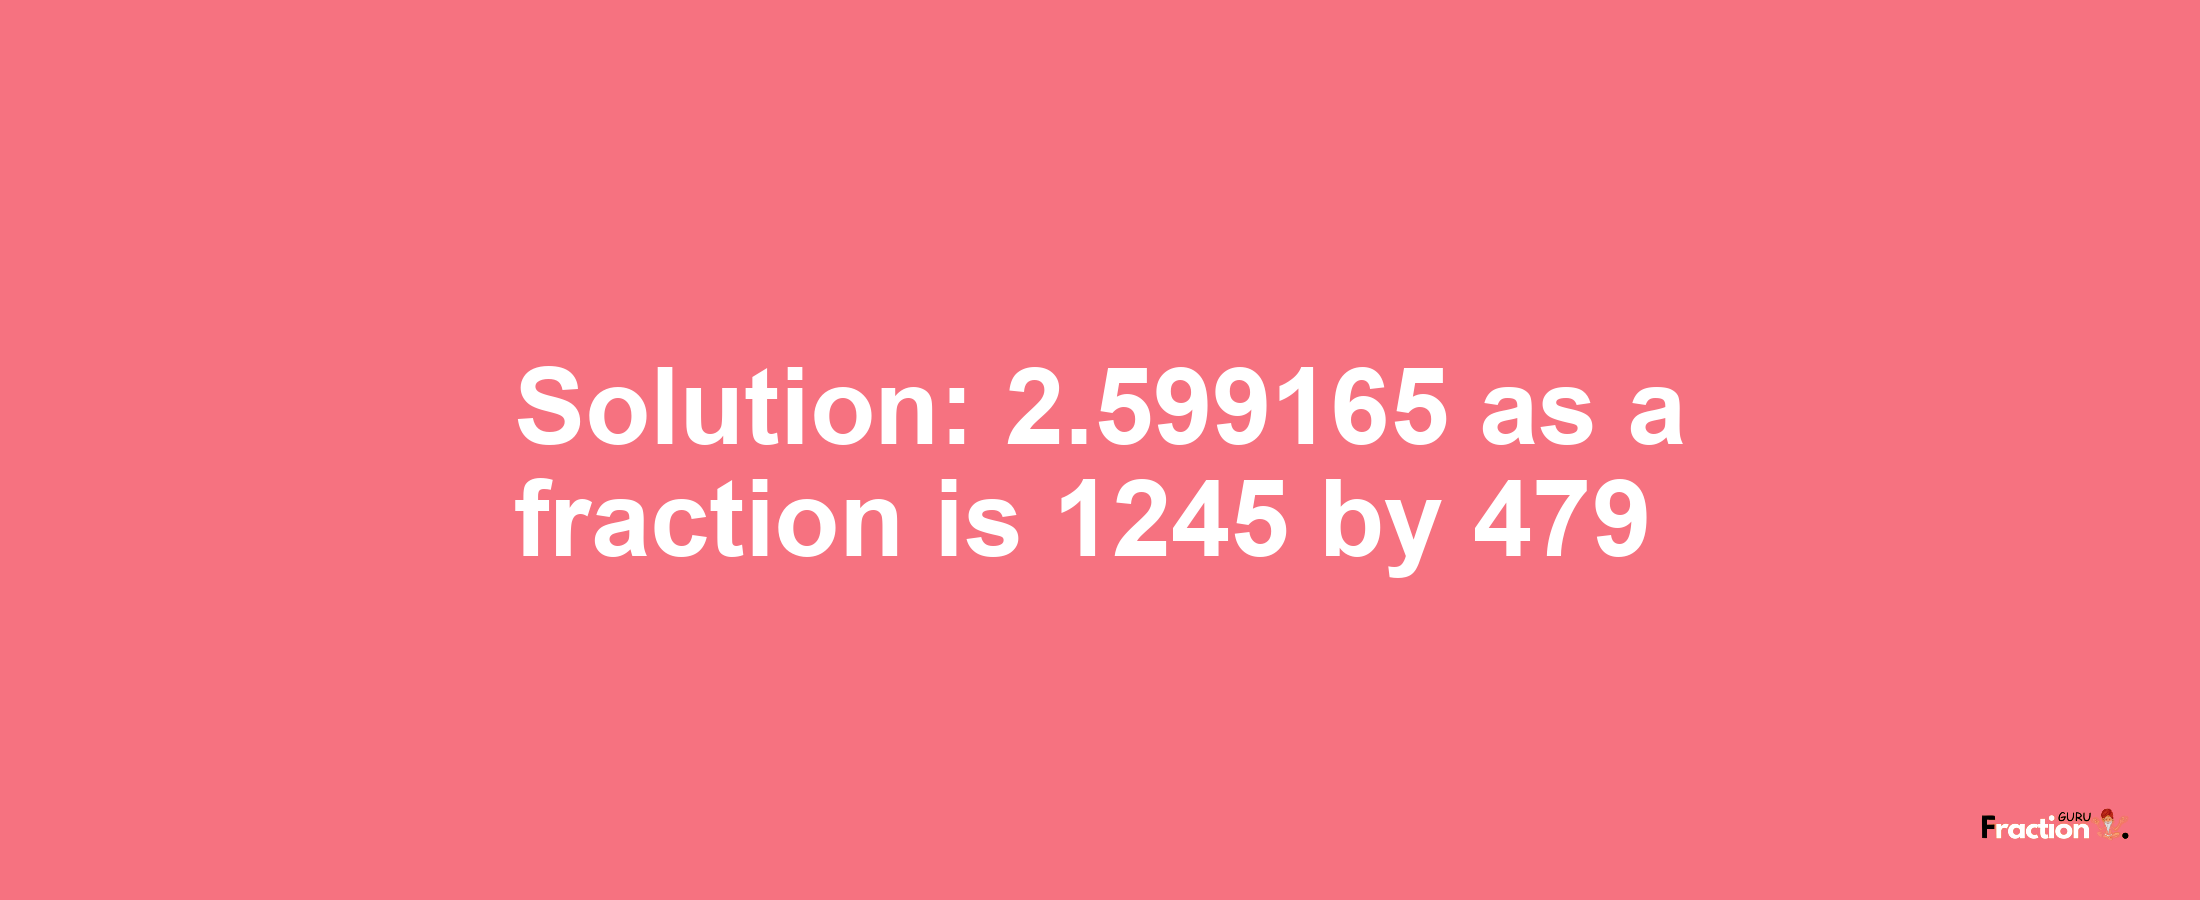 Solution:2.599165 as a fraction is 1245/479